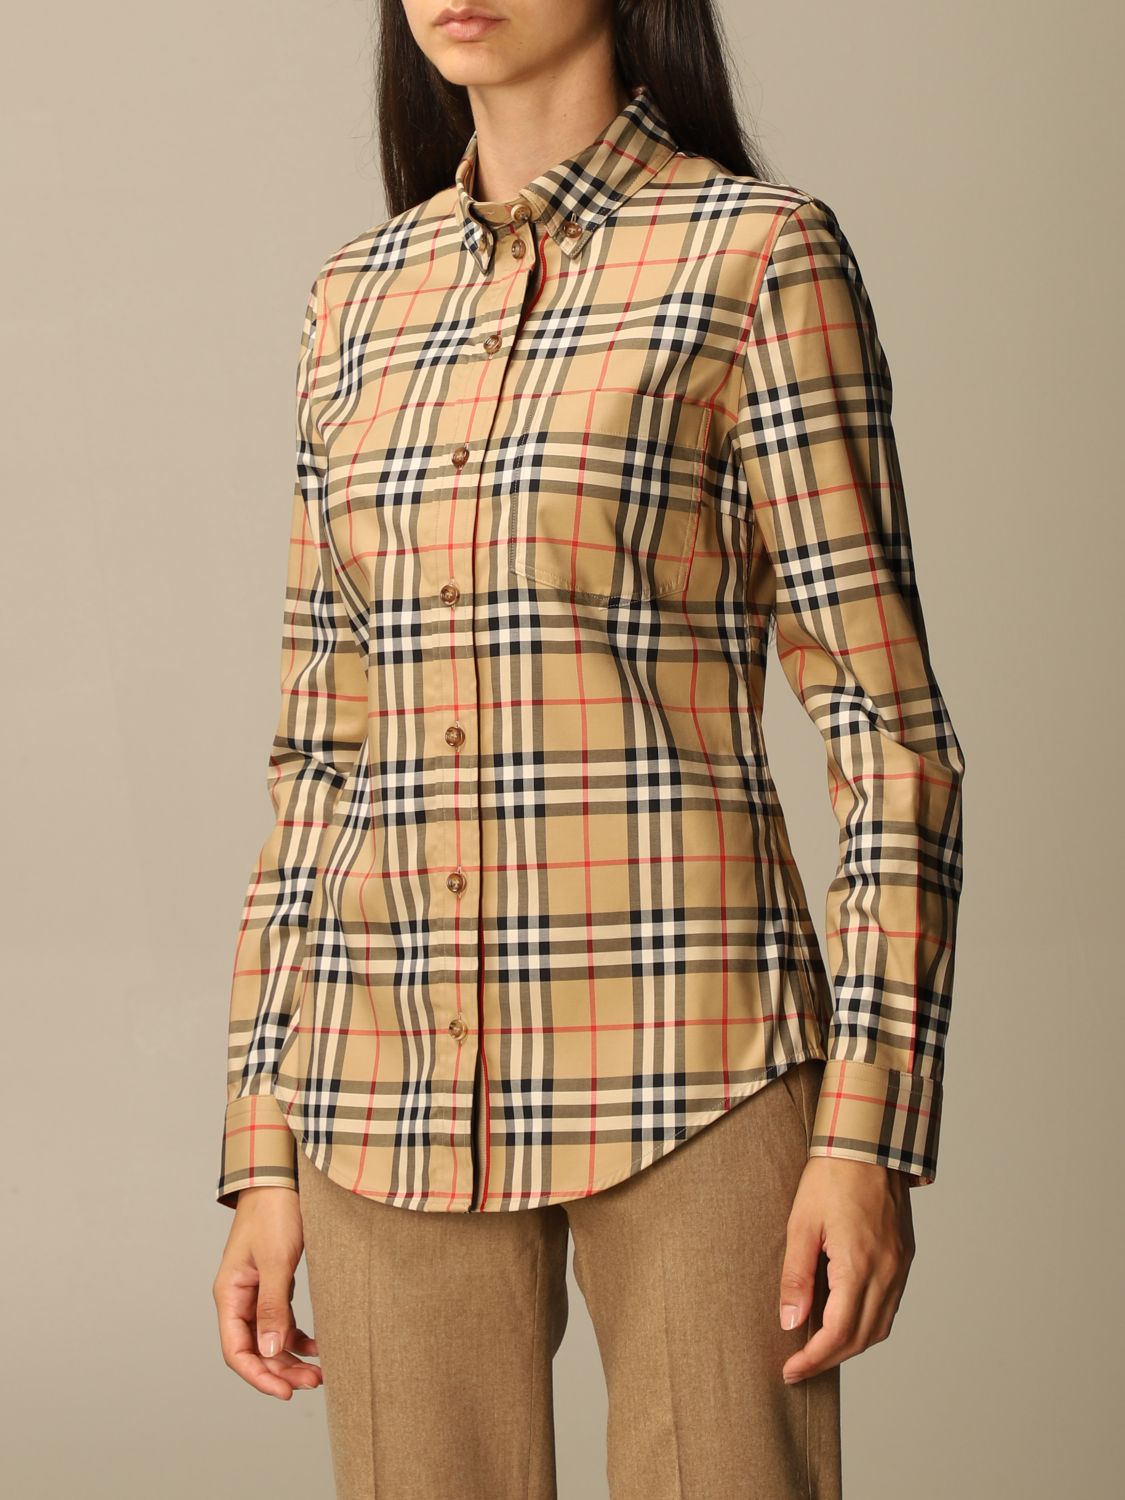 BURBERRY: Lapwing shirt in cotton with vintage check pattern | Shirt ...